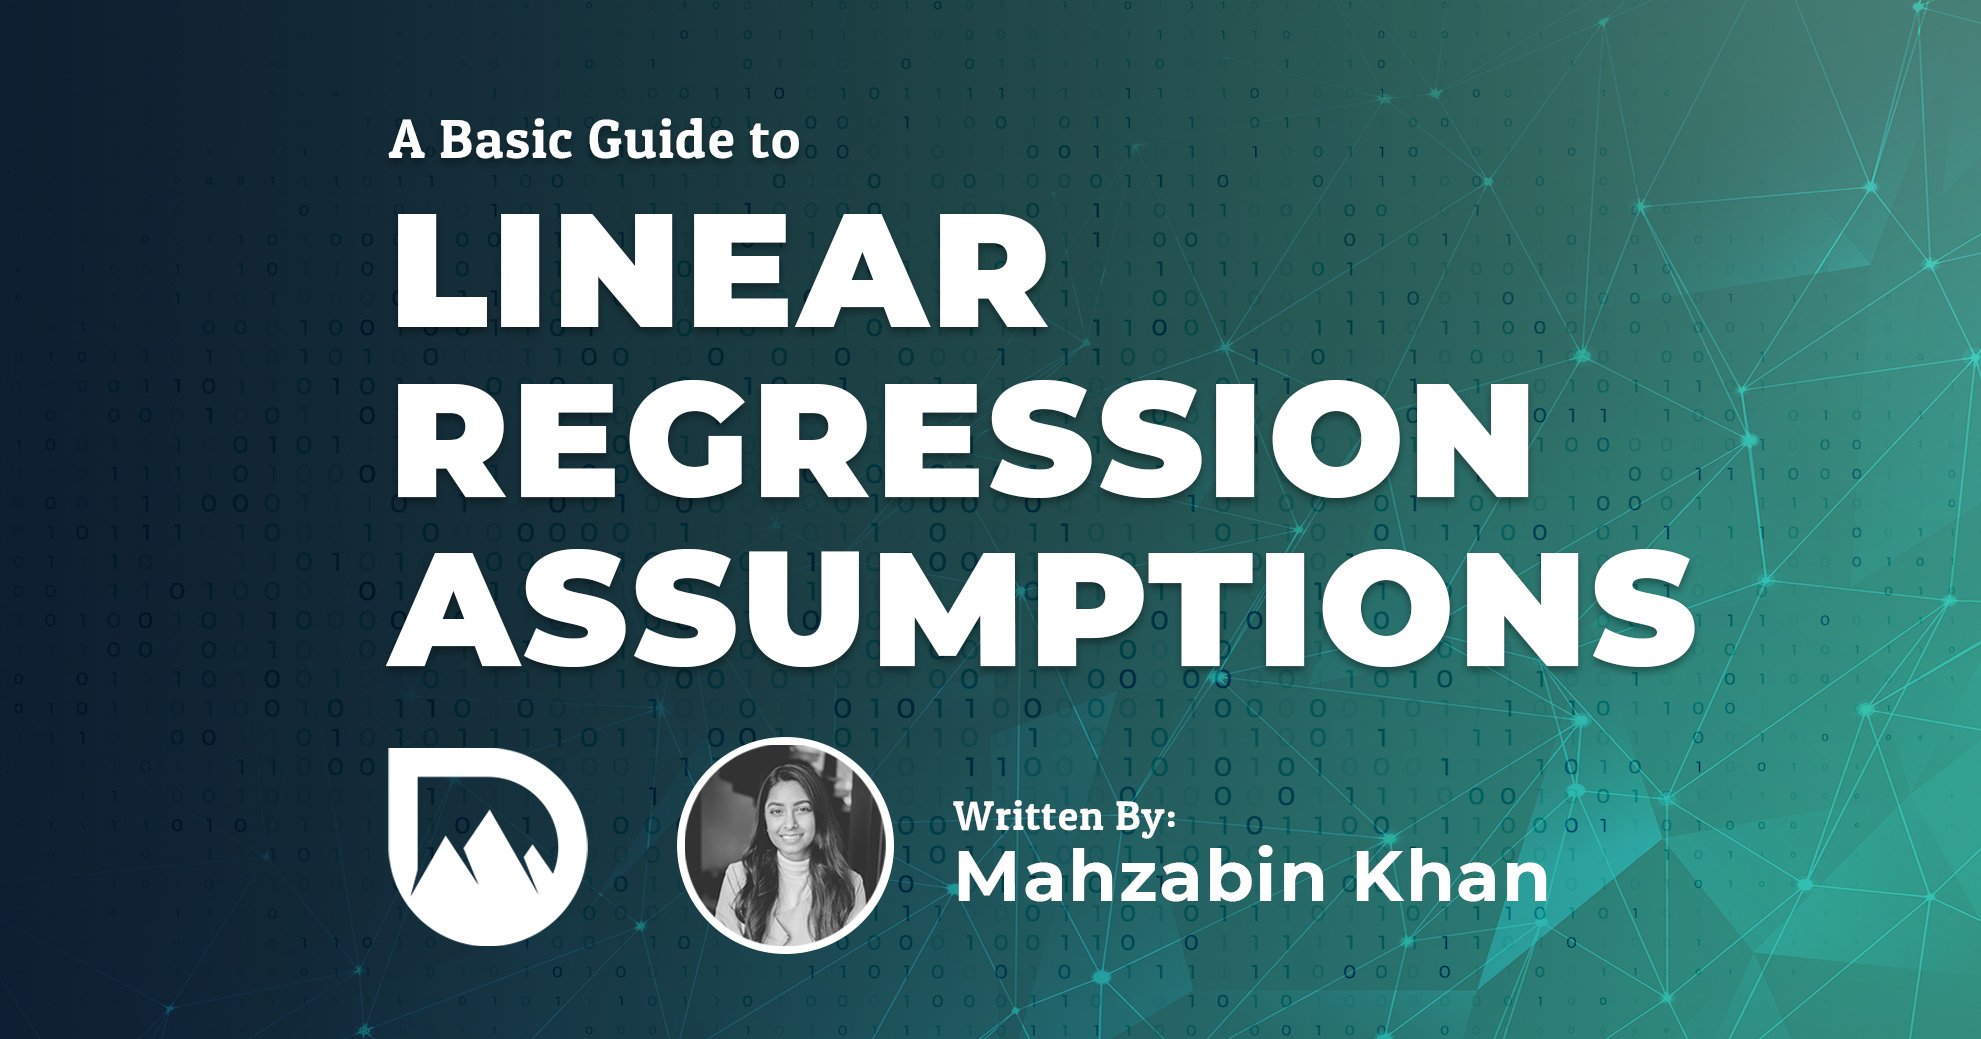 A Basic Guide to Testing the Assumptions of Linear Regression in R